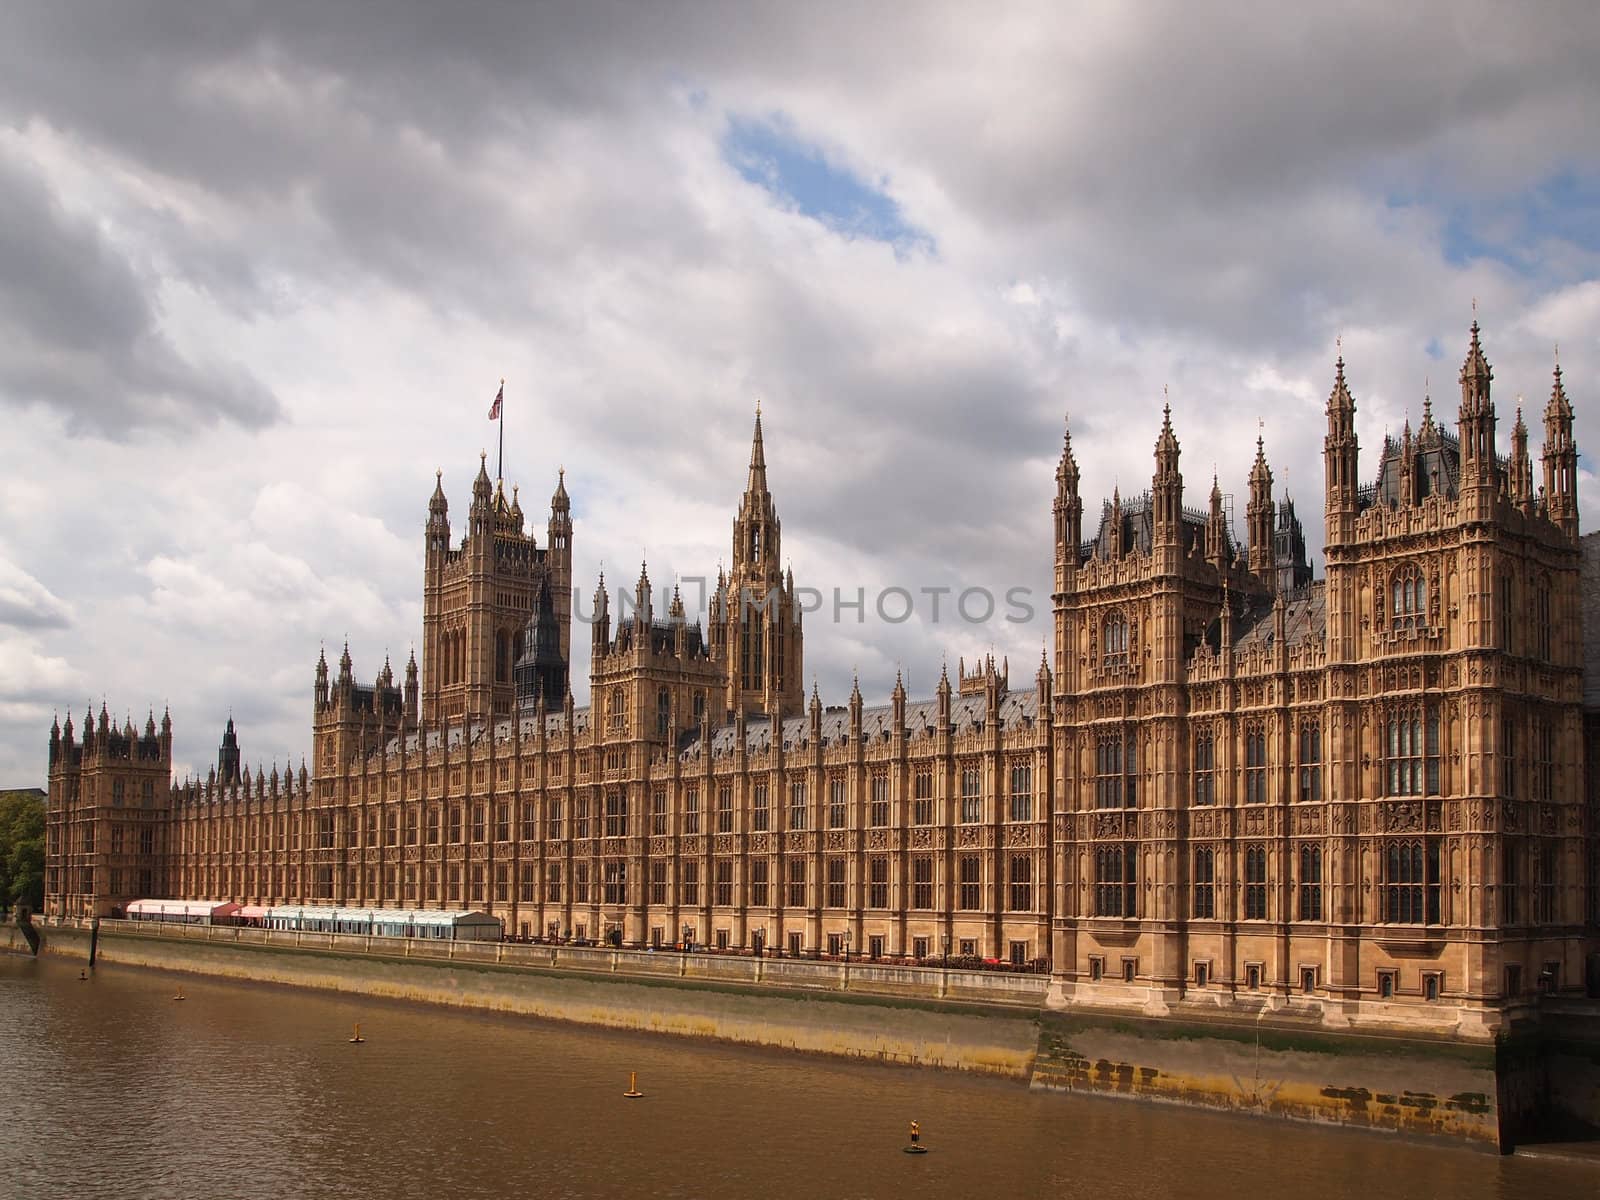 The Houses of Parliament at the River Thames in London, United Kingdom.